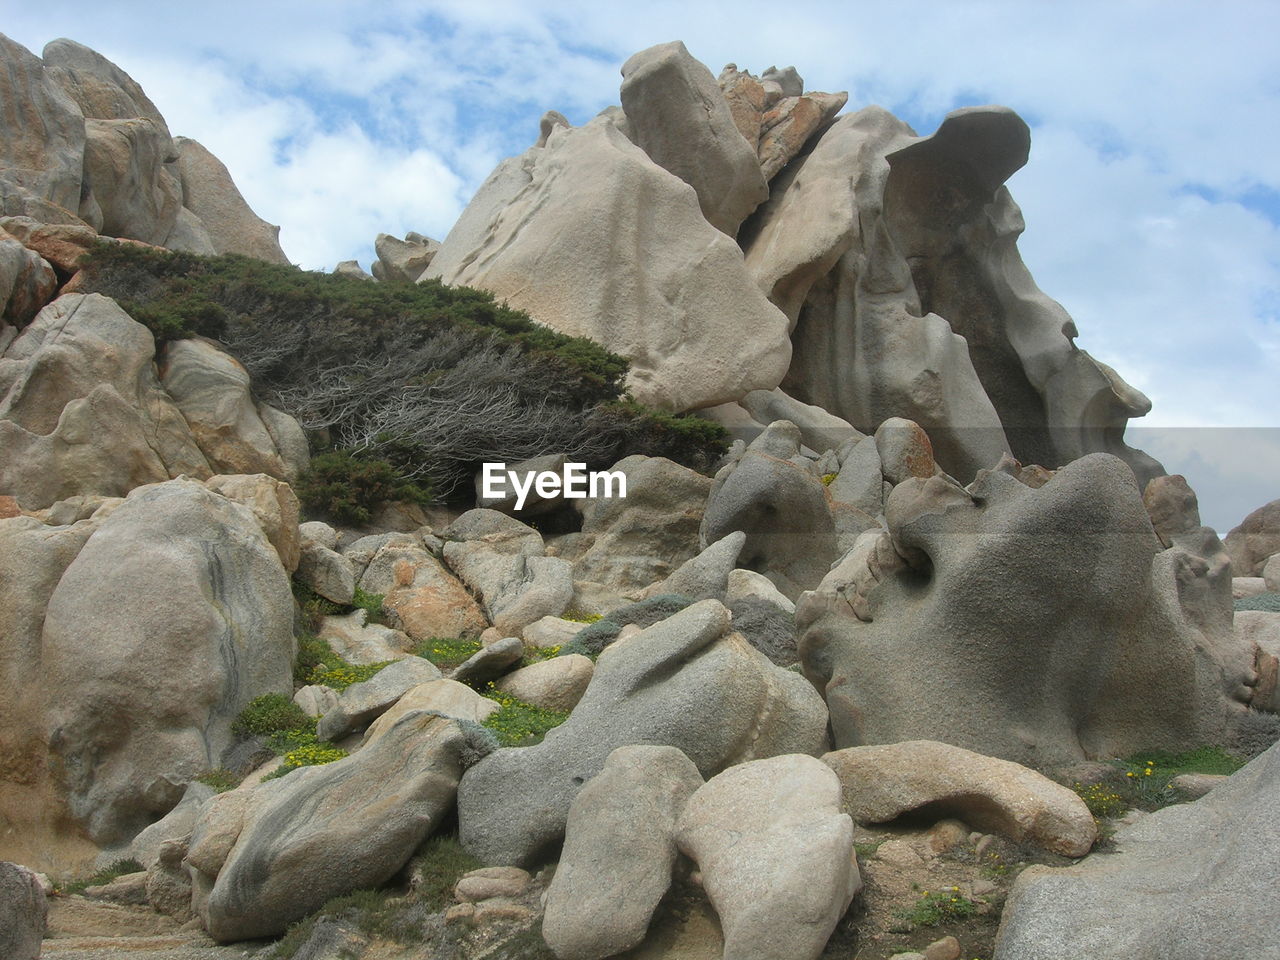 LOW ANGLE VIEW OF SCULPTURE AGAINST ROCKS